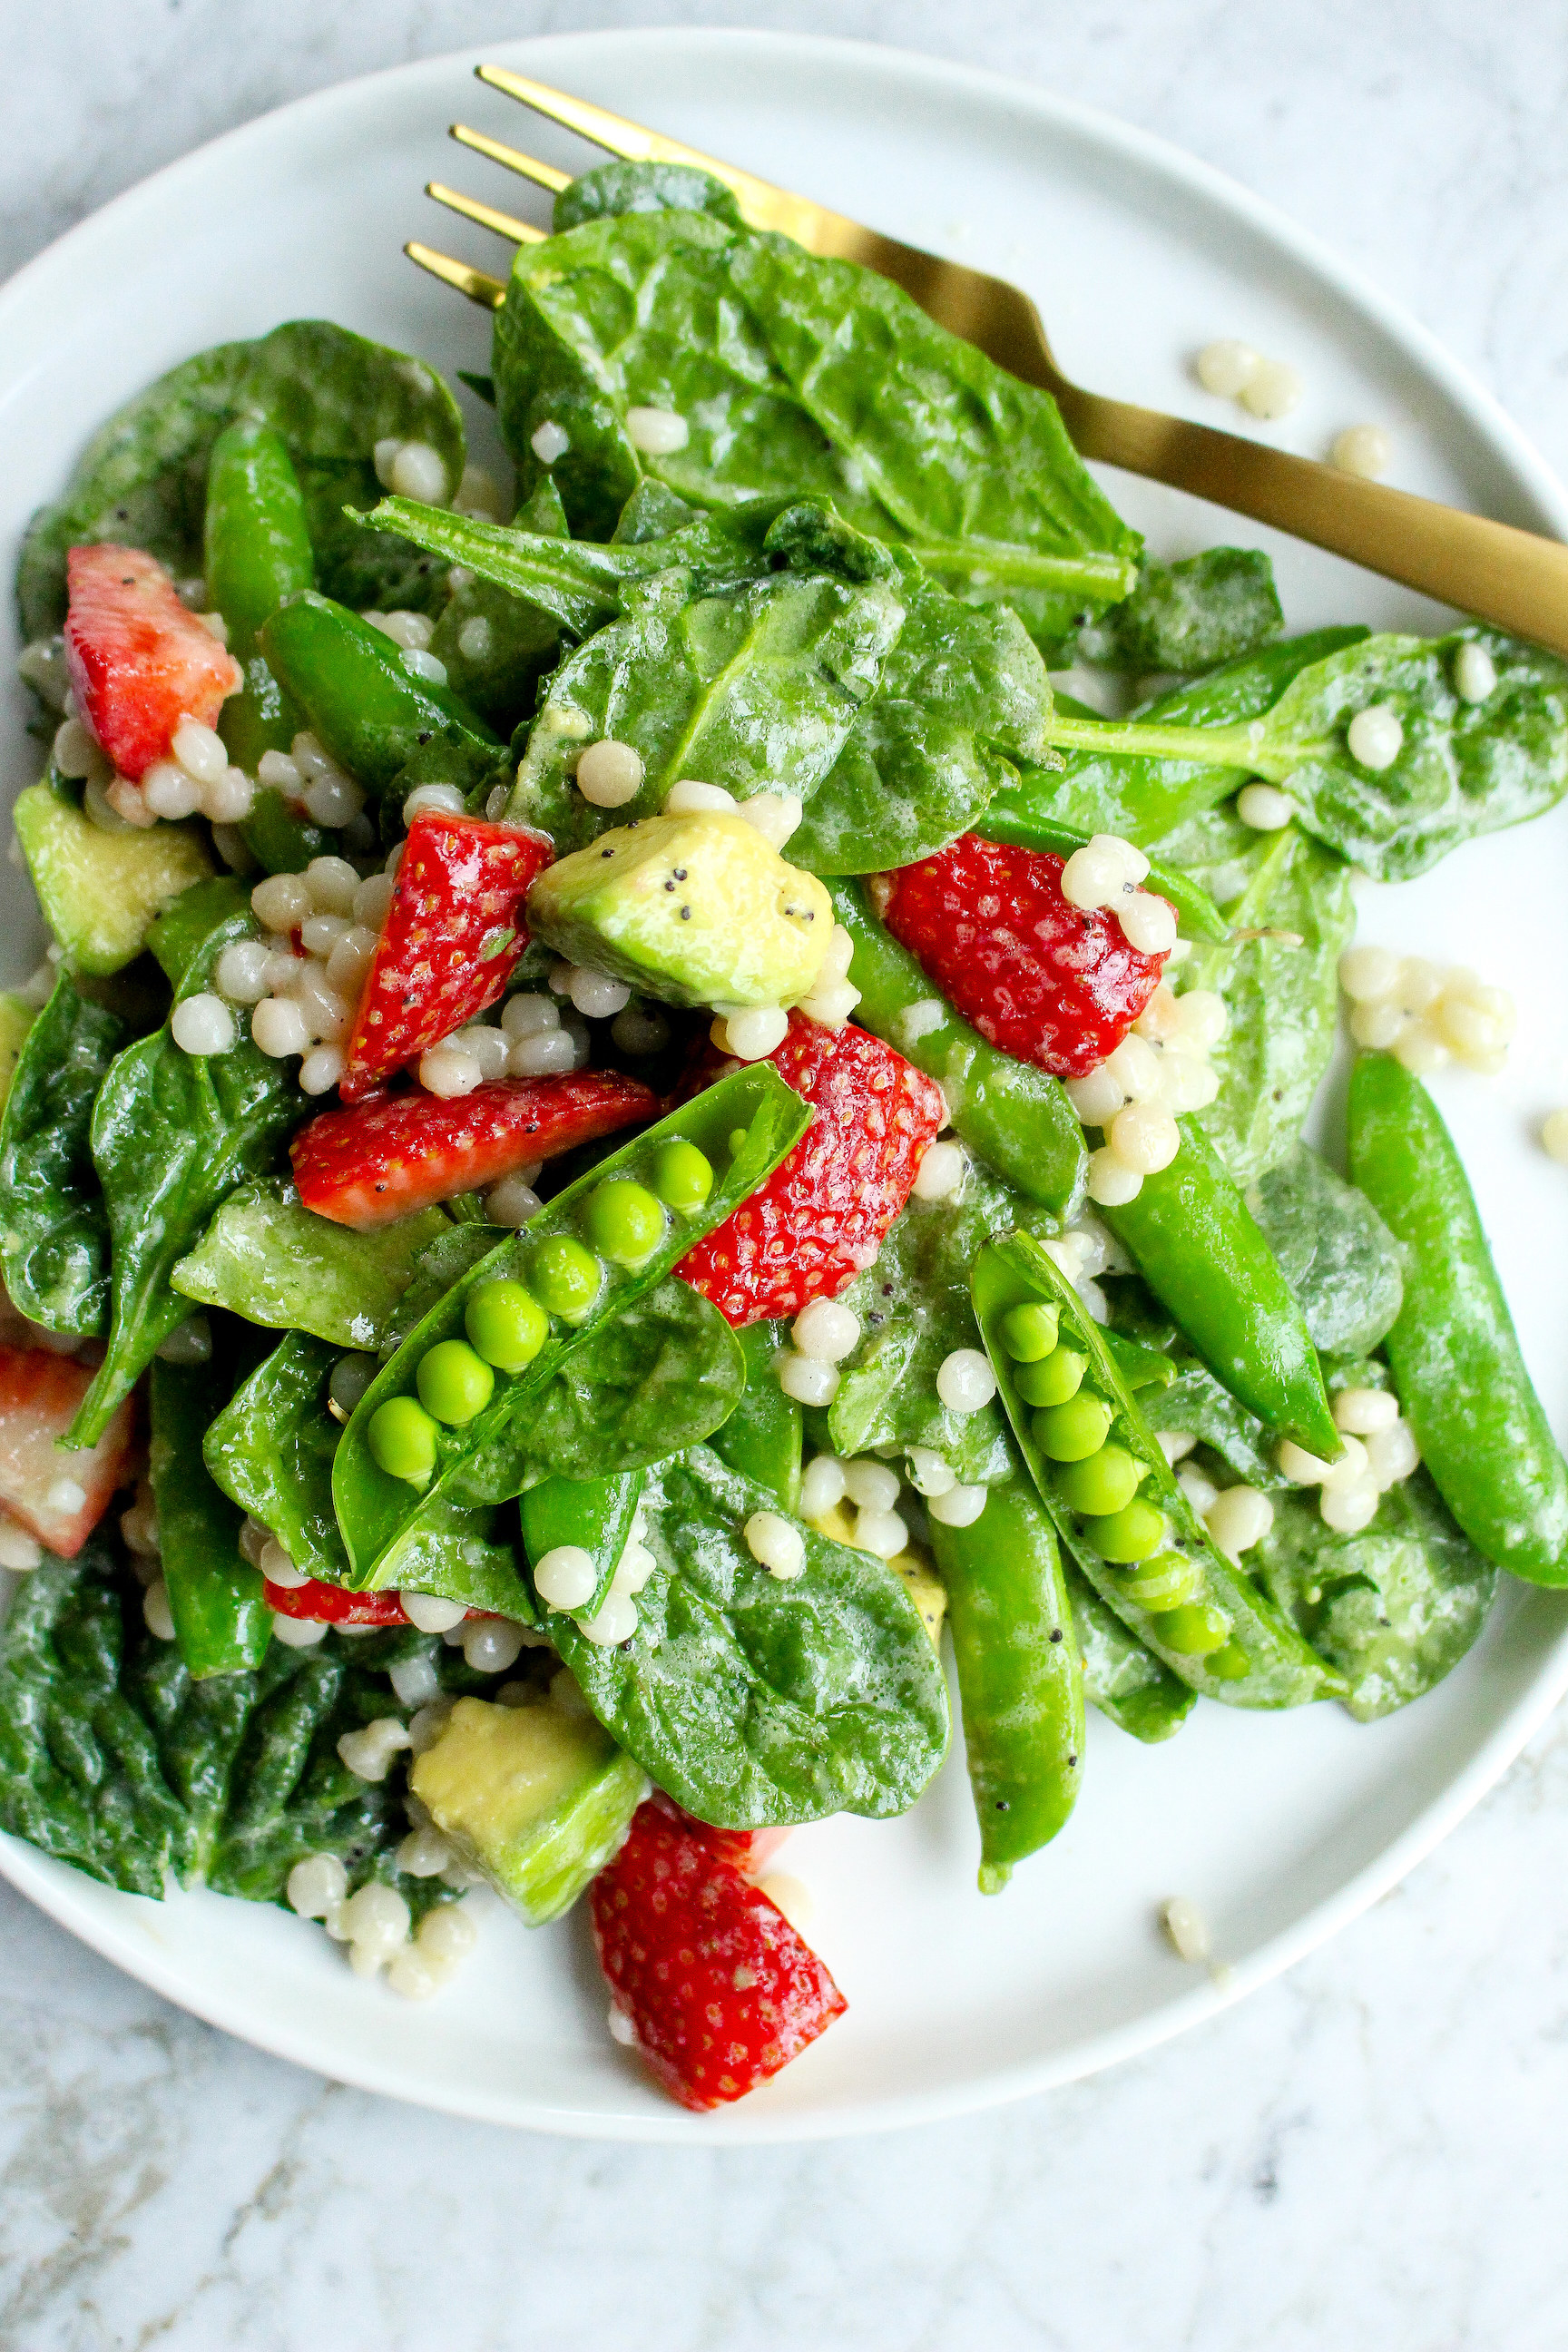 Couscous salad with avocado, strawberry, snap peas, and creamy dressing.